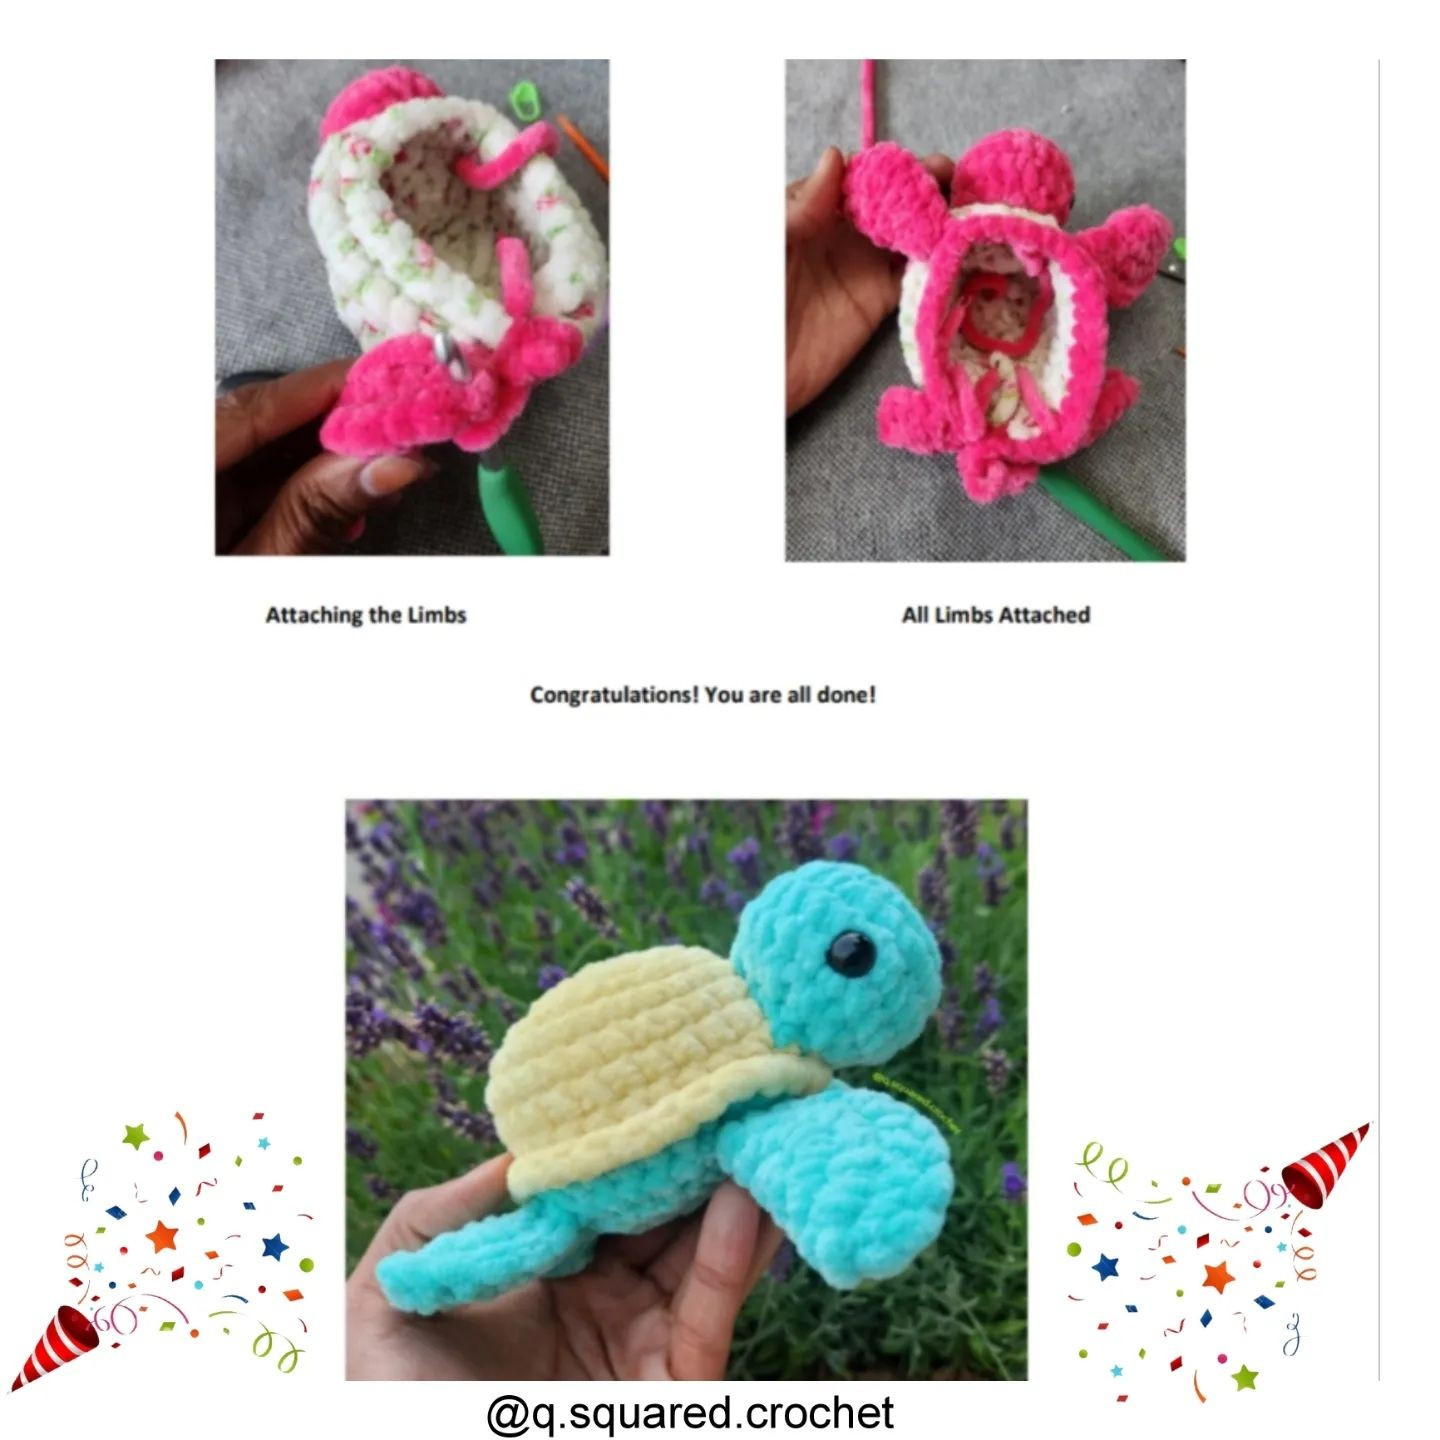 no sew taylor the turtle free pattern